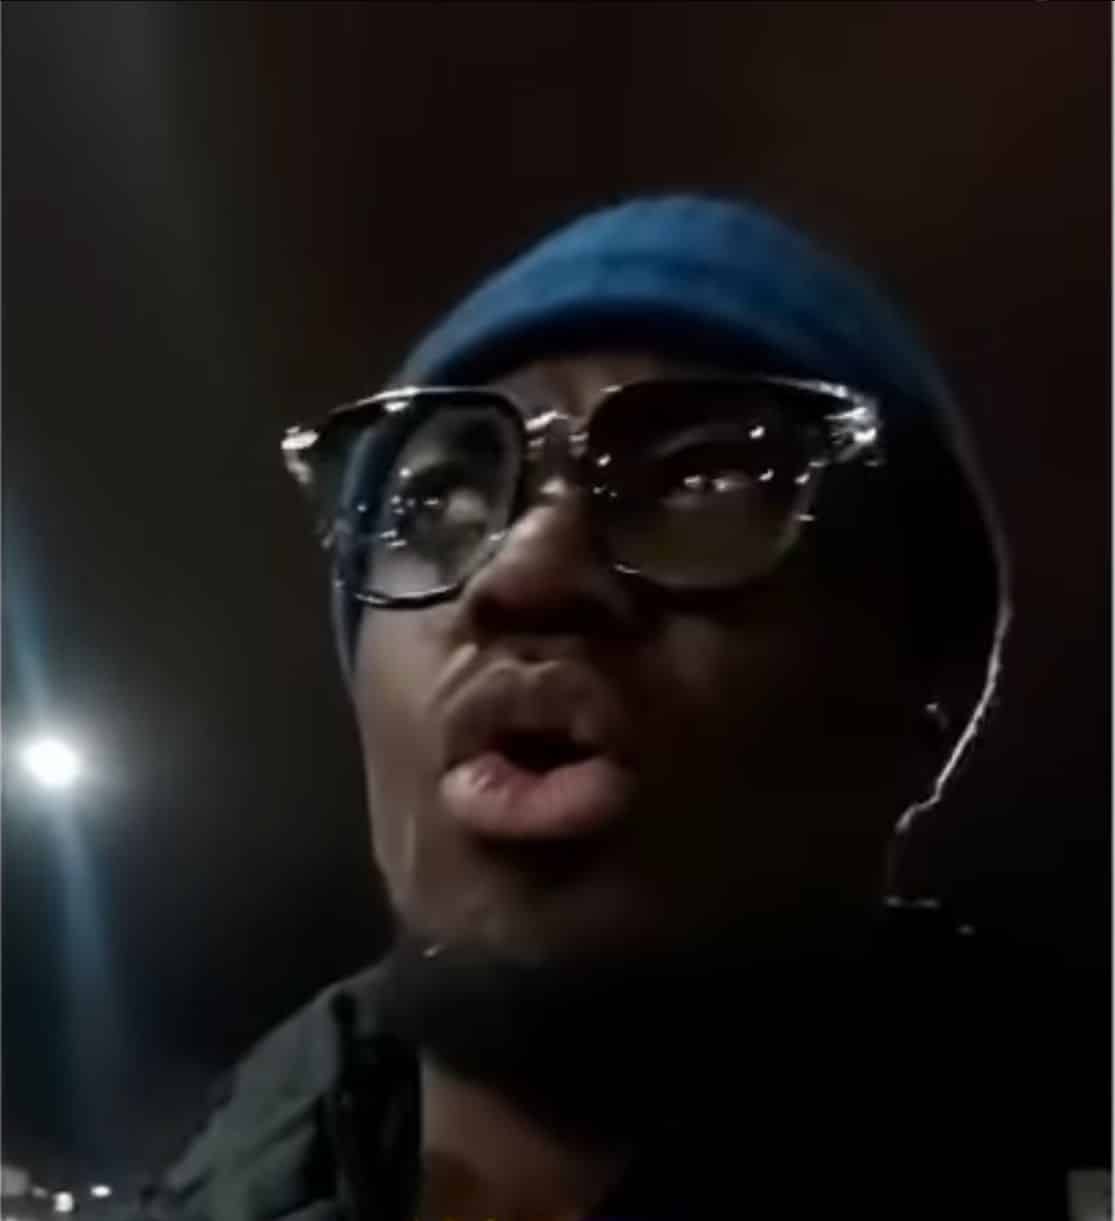 "We're not mates" — UK-based Nigerian man quits job over disrespect (Video)